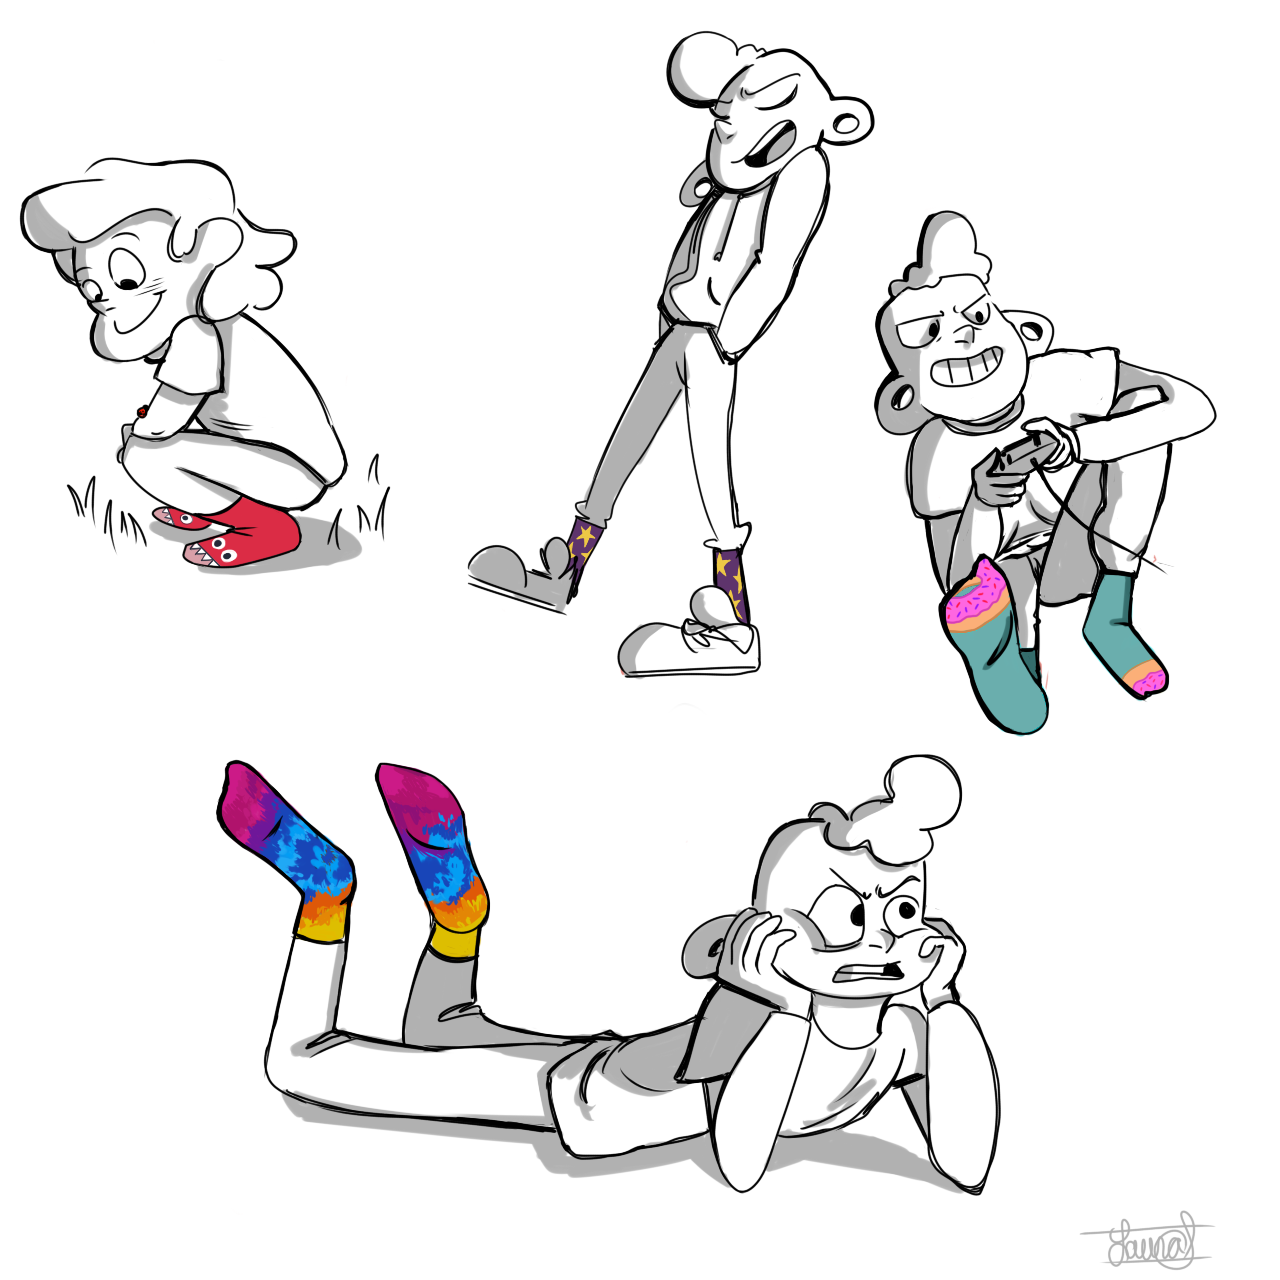 So i was rewatching “The New Lars”, and i noticed his mom had on these colorful socks. And she was talking about how she got him the heart shaped plugs, right? Anyway, what i’m trying to say is that...